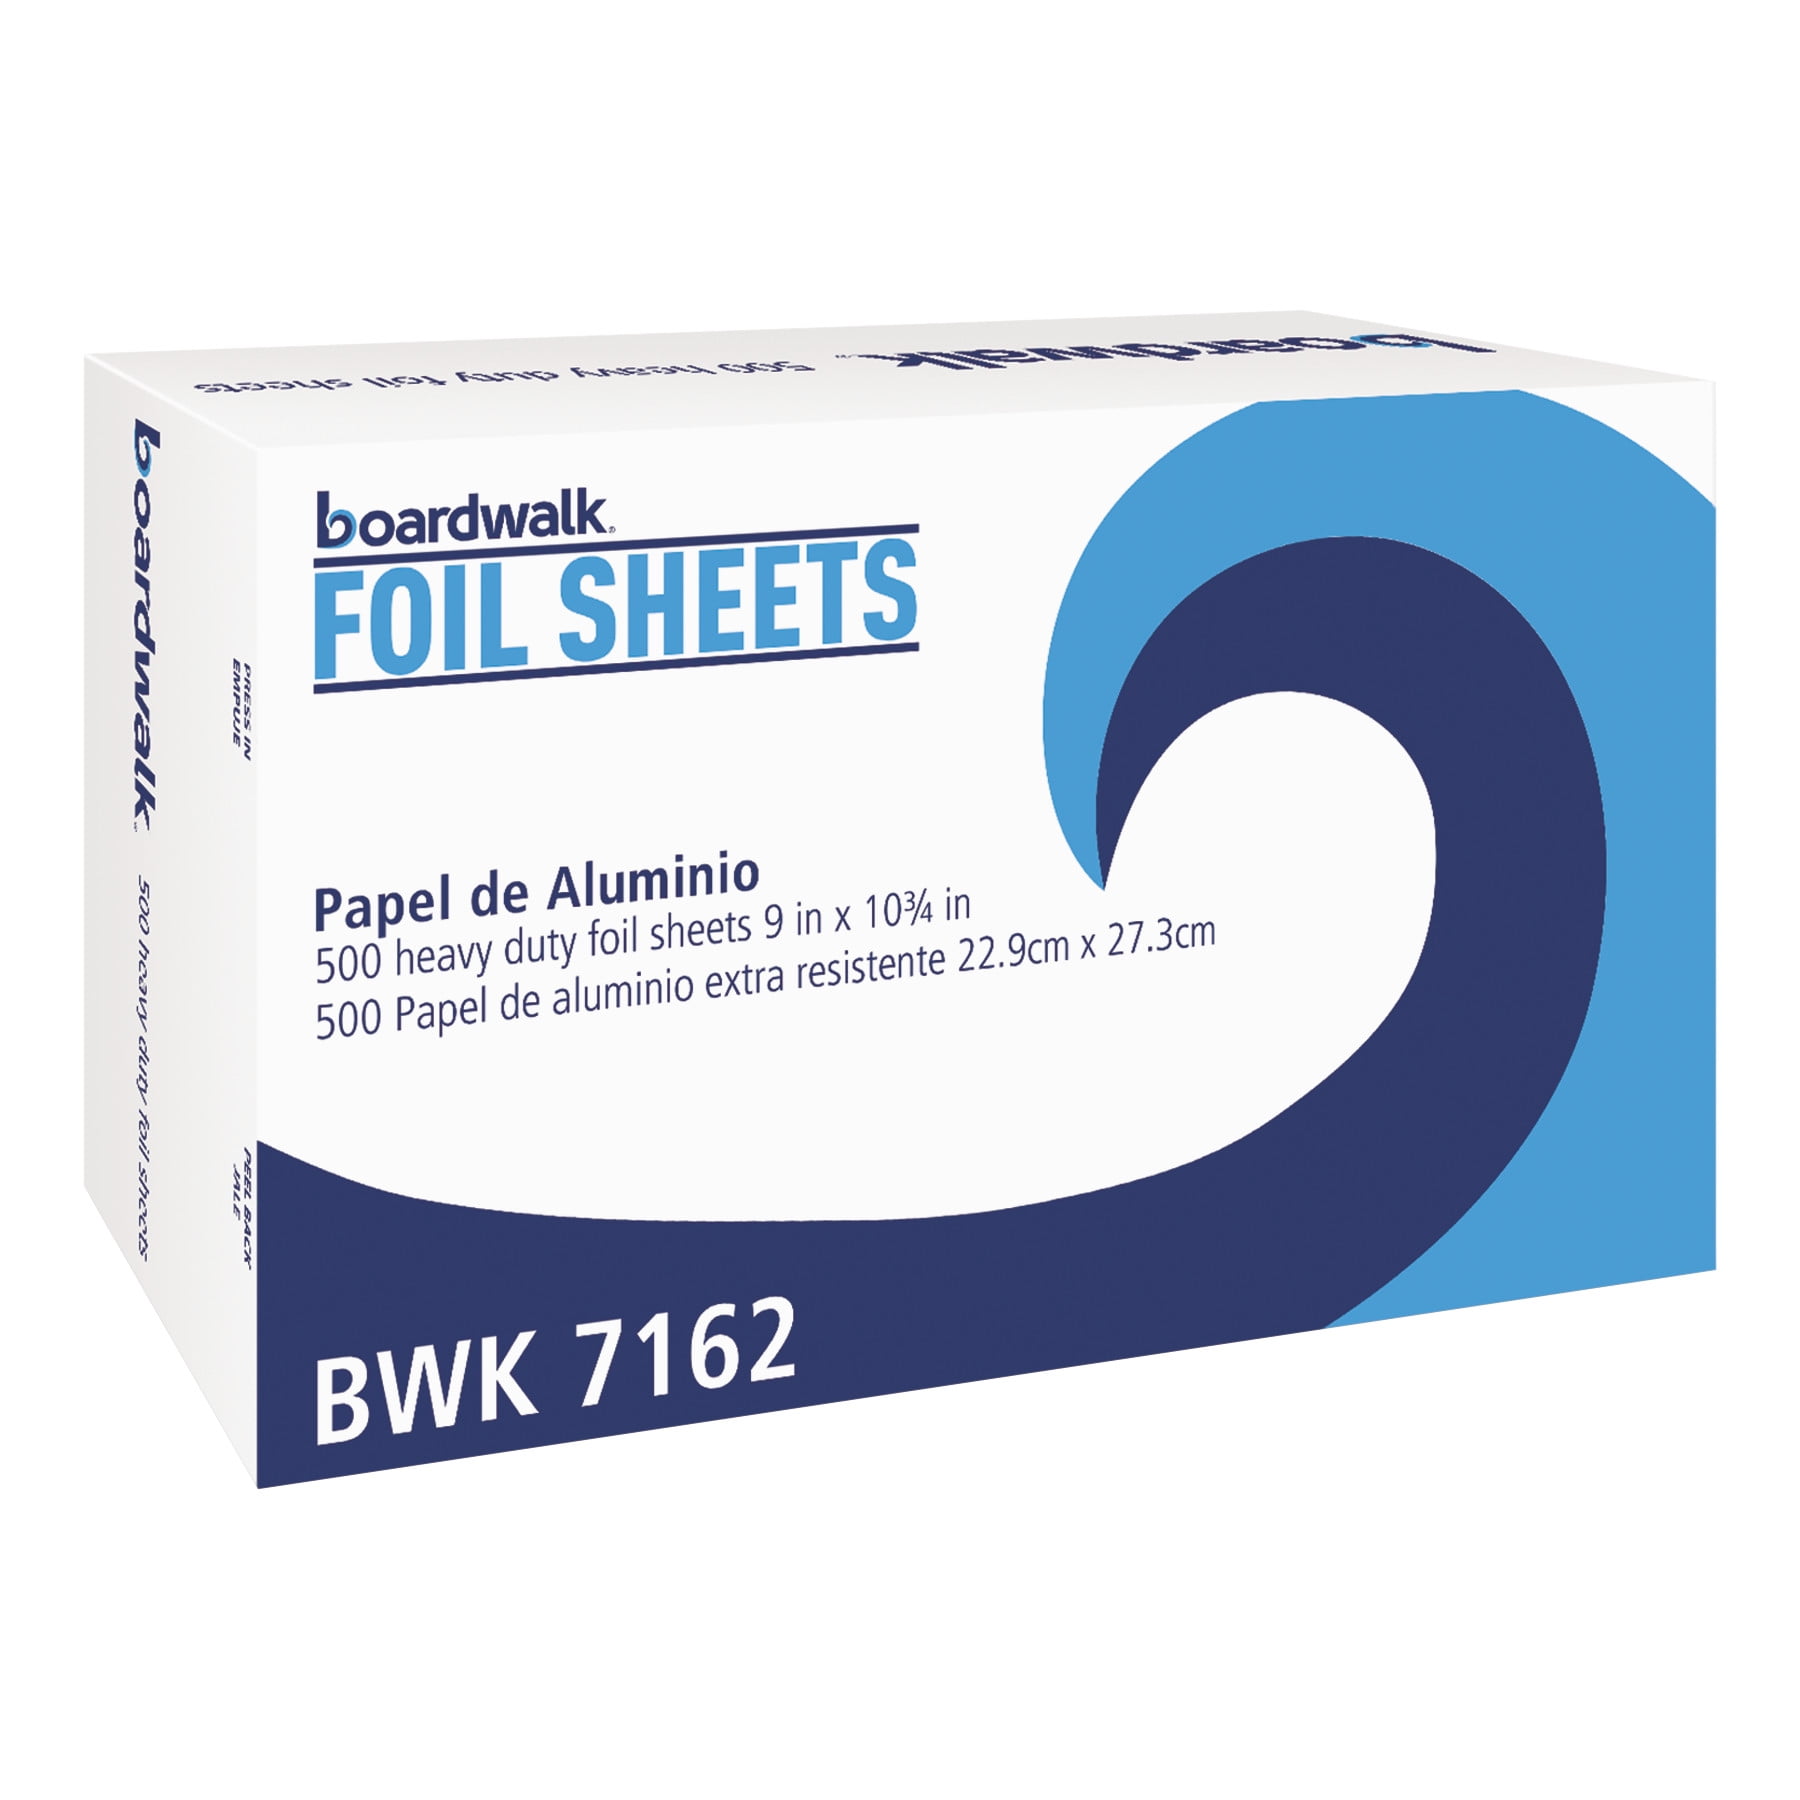 RW Base Foodservice Heavy-Duty Aluminum Foil Pop-Up Sheet - Interfolded - 9 inch x 10 3/4 inch - 500 Count Box, Silver